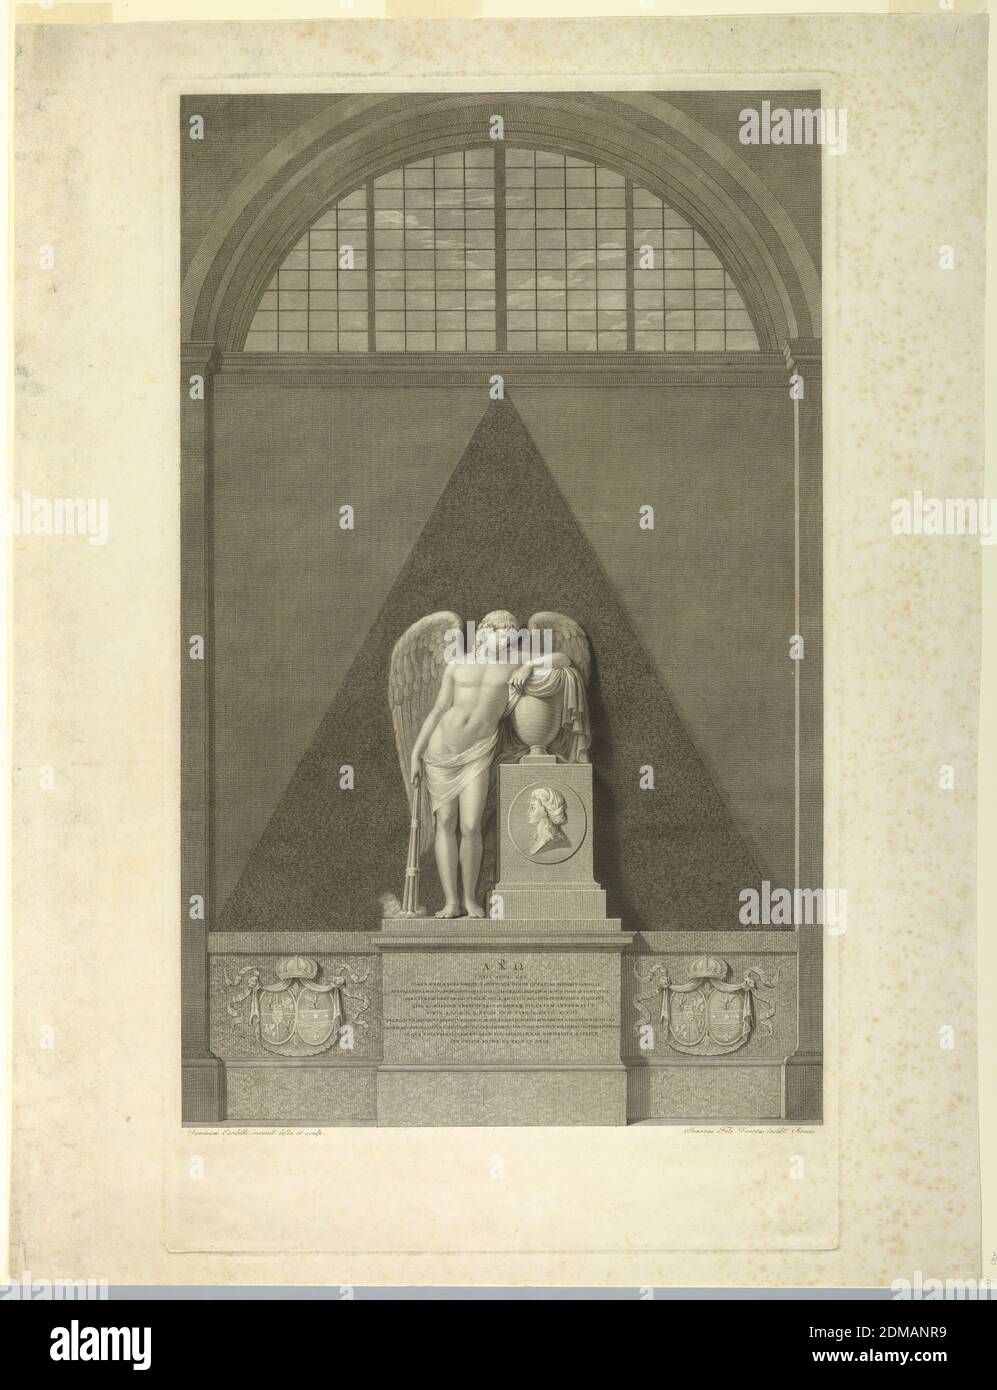 The Tomb of Clara-Maria of Saxony, Domenico Cardelli, Italian, active 1786-1810, Giovanni Folo, Engraving on paper, Under a lunette window is the wall tomb of Clara Maria Rosa Spinucci, Princess of Saxony (d. 1792), in the Cathedral of Fano. Before a pyramid, a winged figure is about to extinguish a torch; beside it, a medallion portrait of the deceased., Rome, Italy, ca. 1800-1810, Print Stock Photo